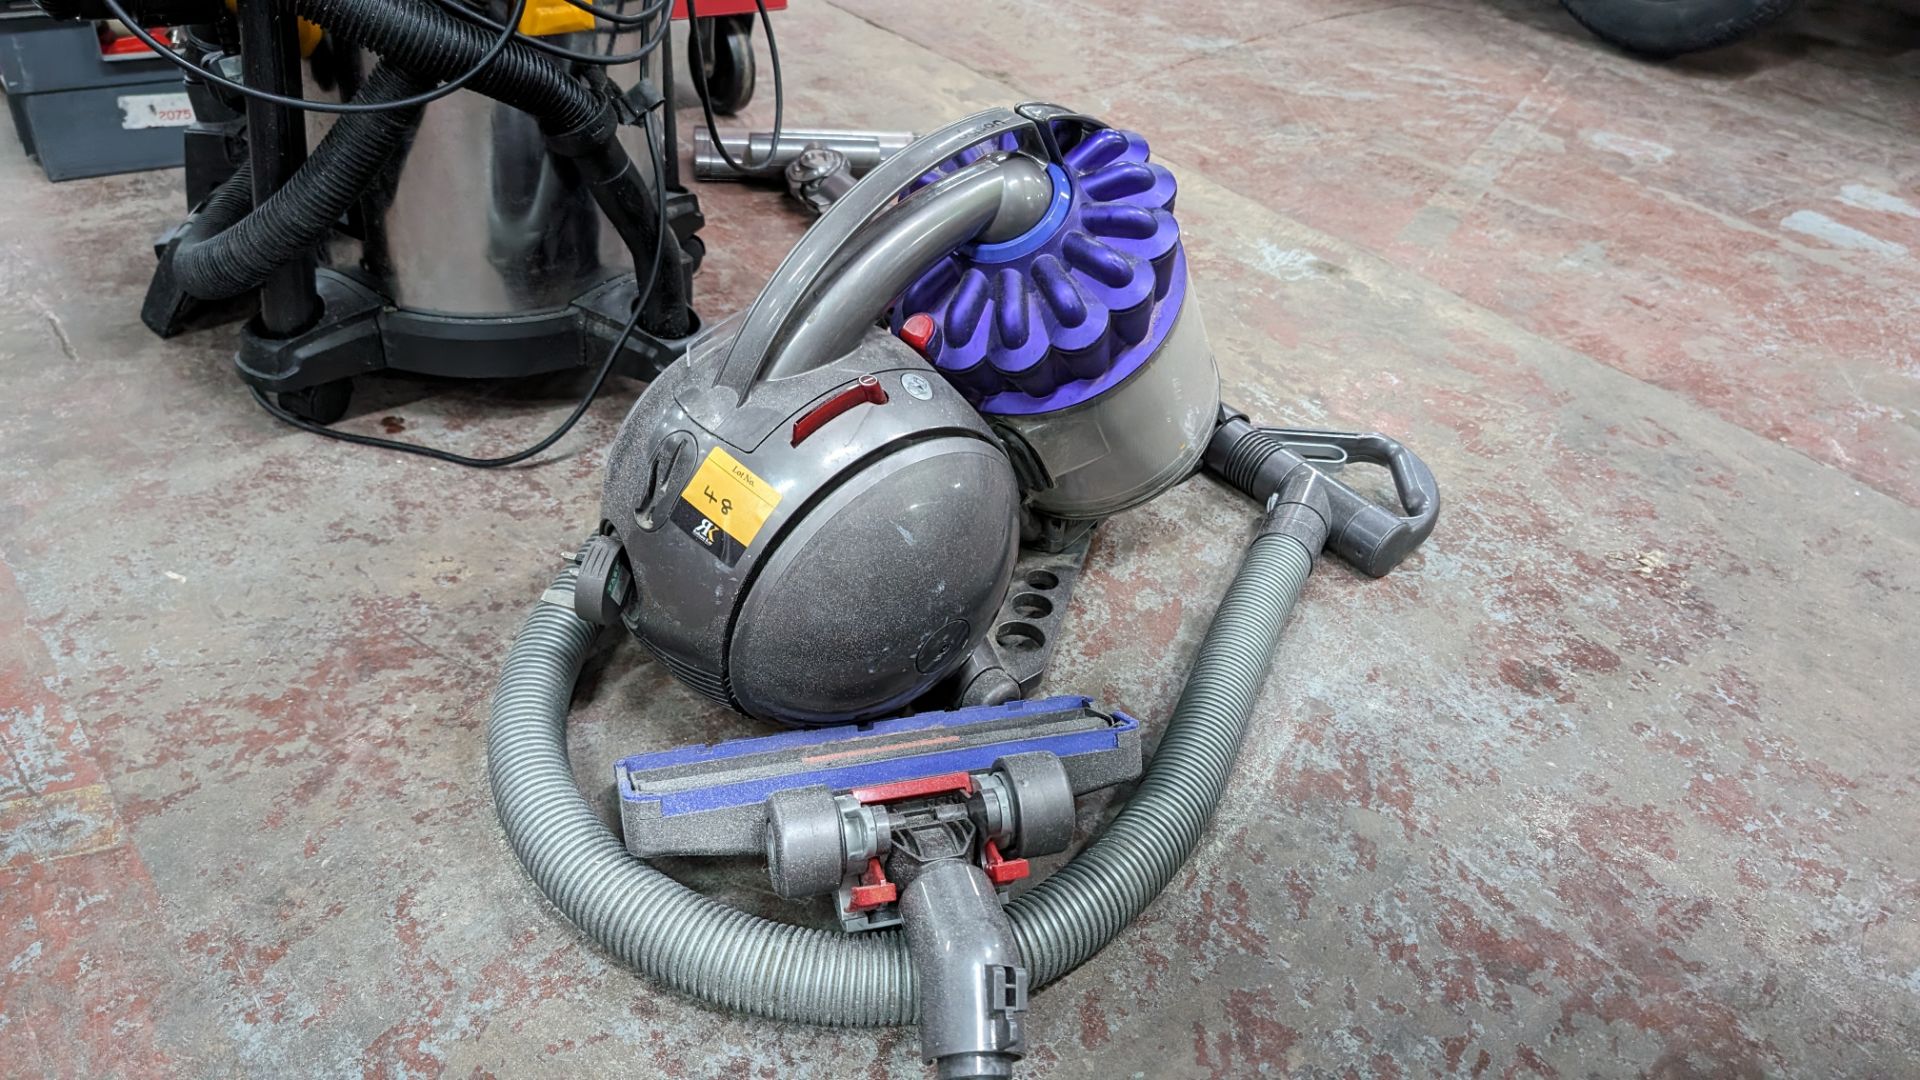 Dyson vacuum cleaner - Image 2 of 7